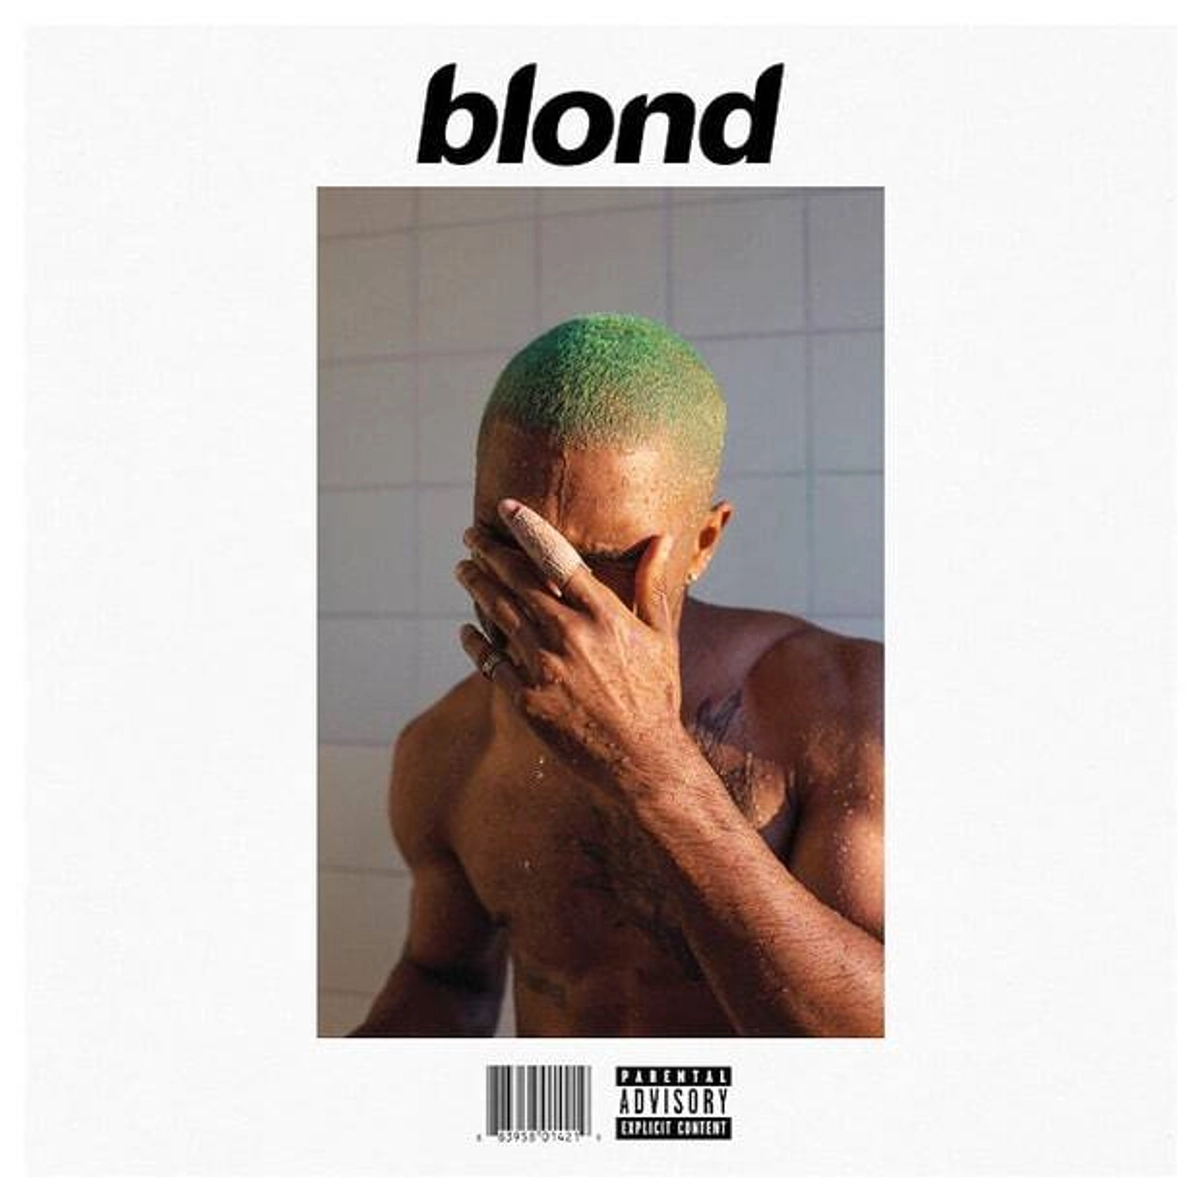 Frank+Oceans+Blonde+Changed+the+Music+Industry